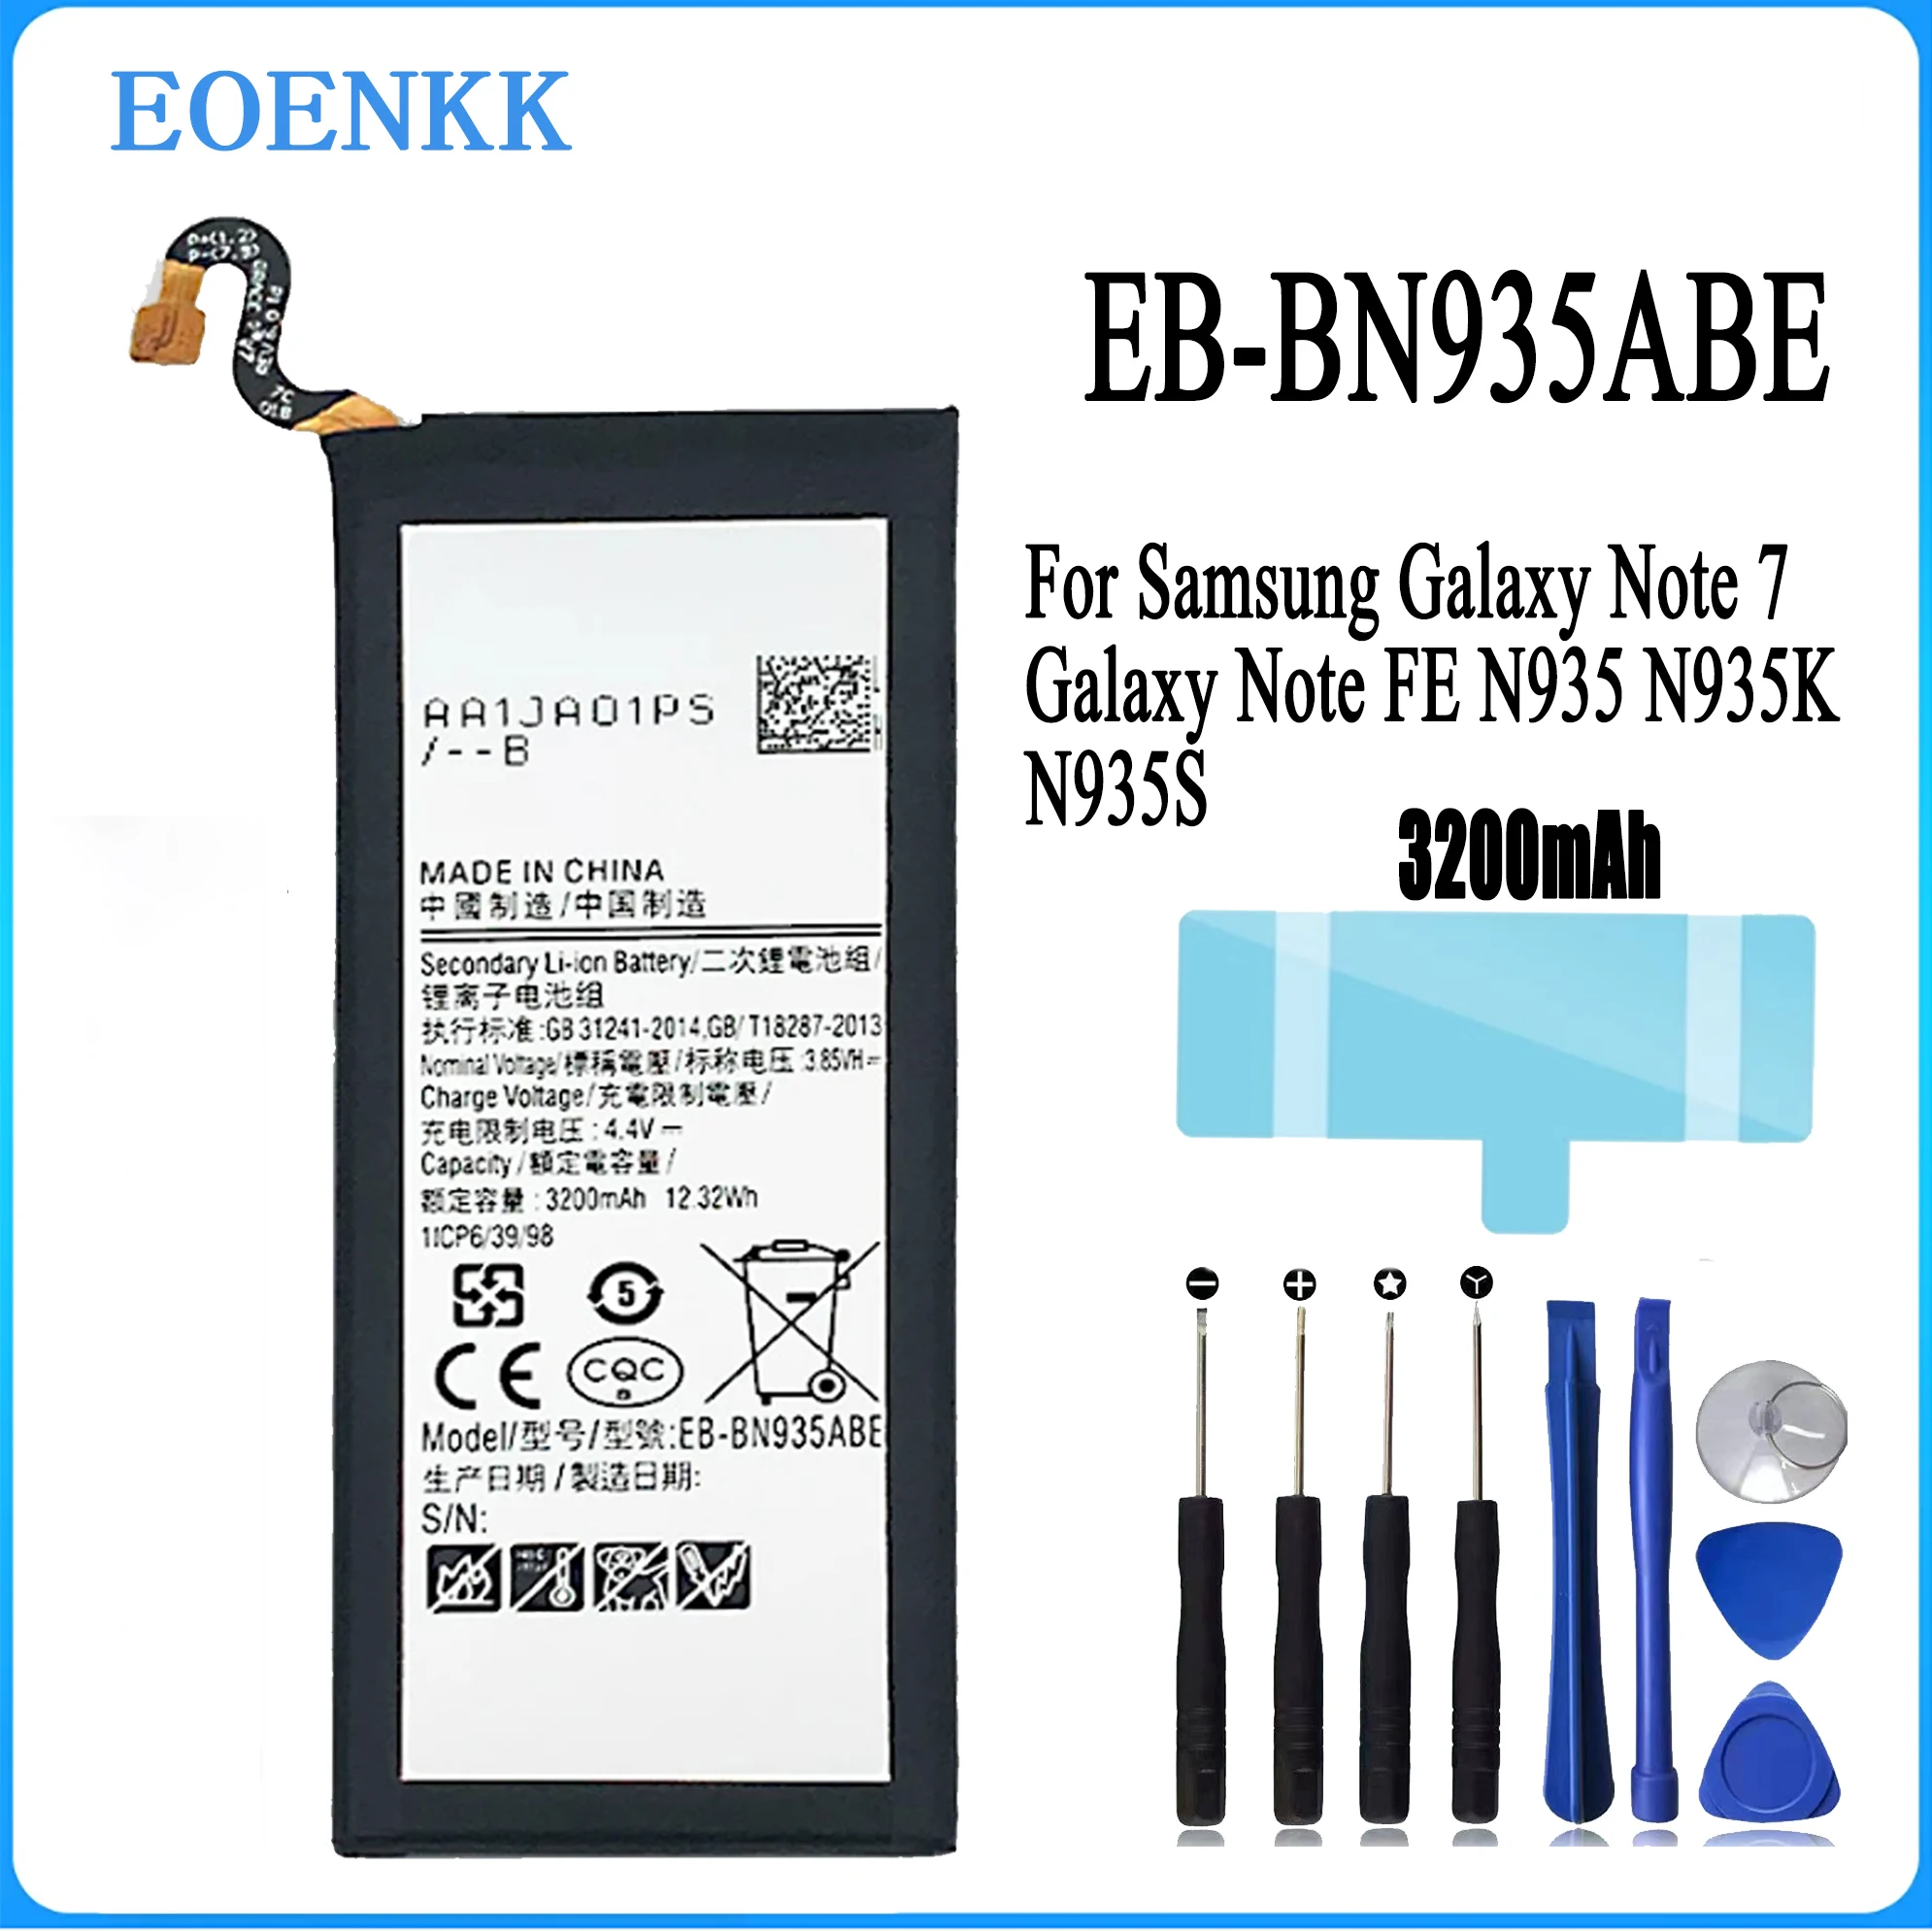 

EB-BN935ABE Battery For Samsung Note 7 N935 NOTE FE NOTE7 high capacity Capacity Mobile Phone Batteries Bateria